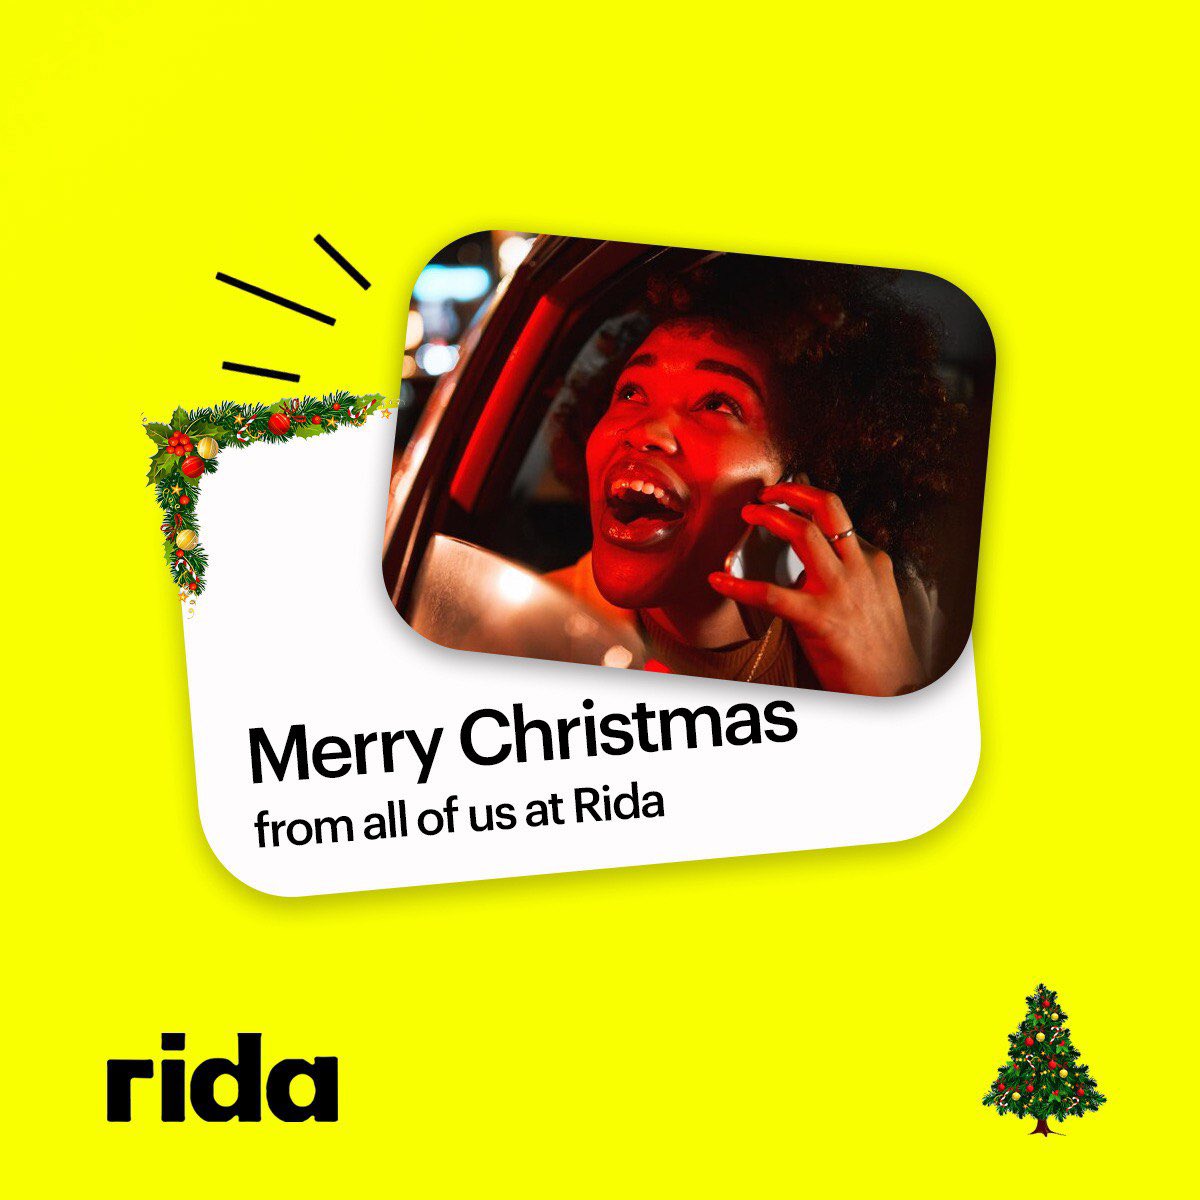 Merry Christmas! We wish you an amazing holiday filled with love and all the good things this season. 🎄 From all of us at Rida. #RidaApp